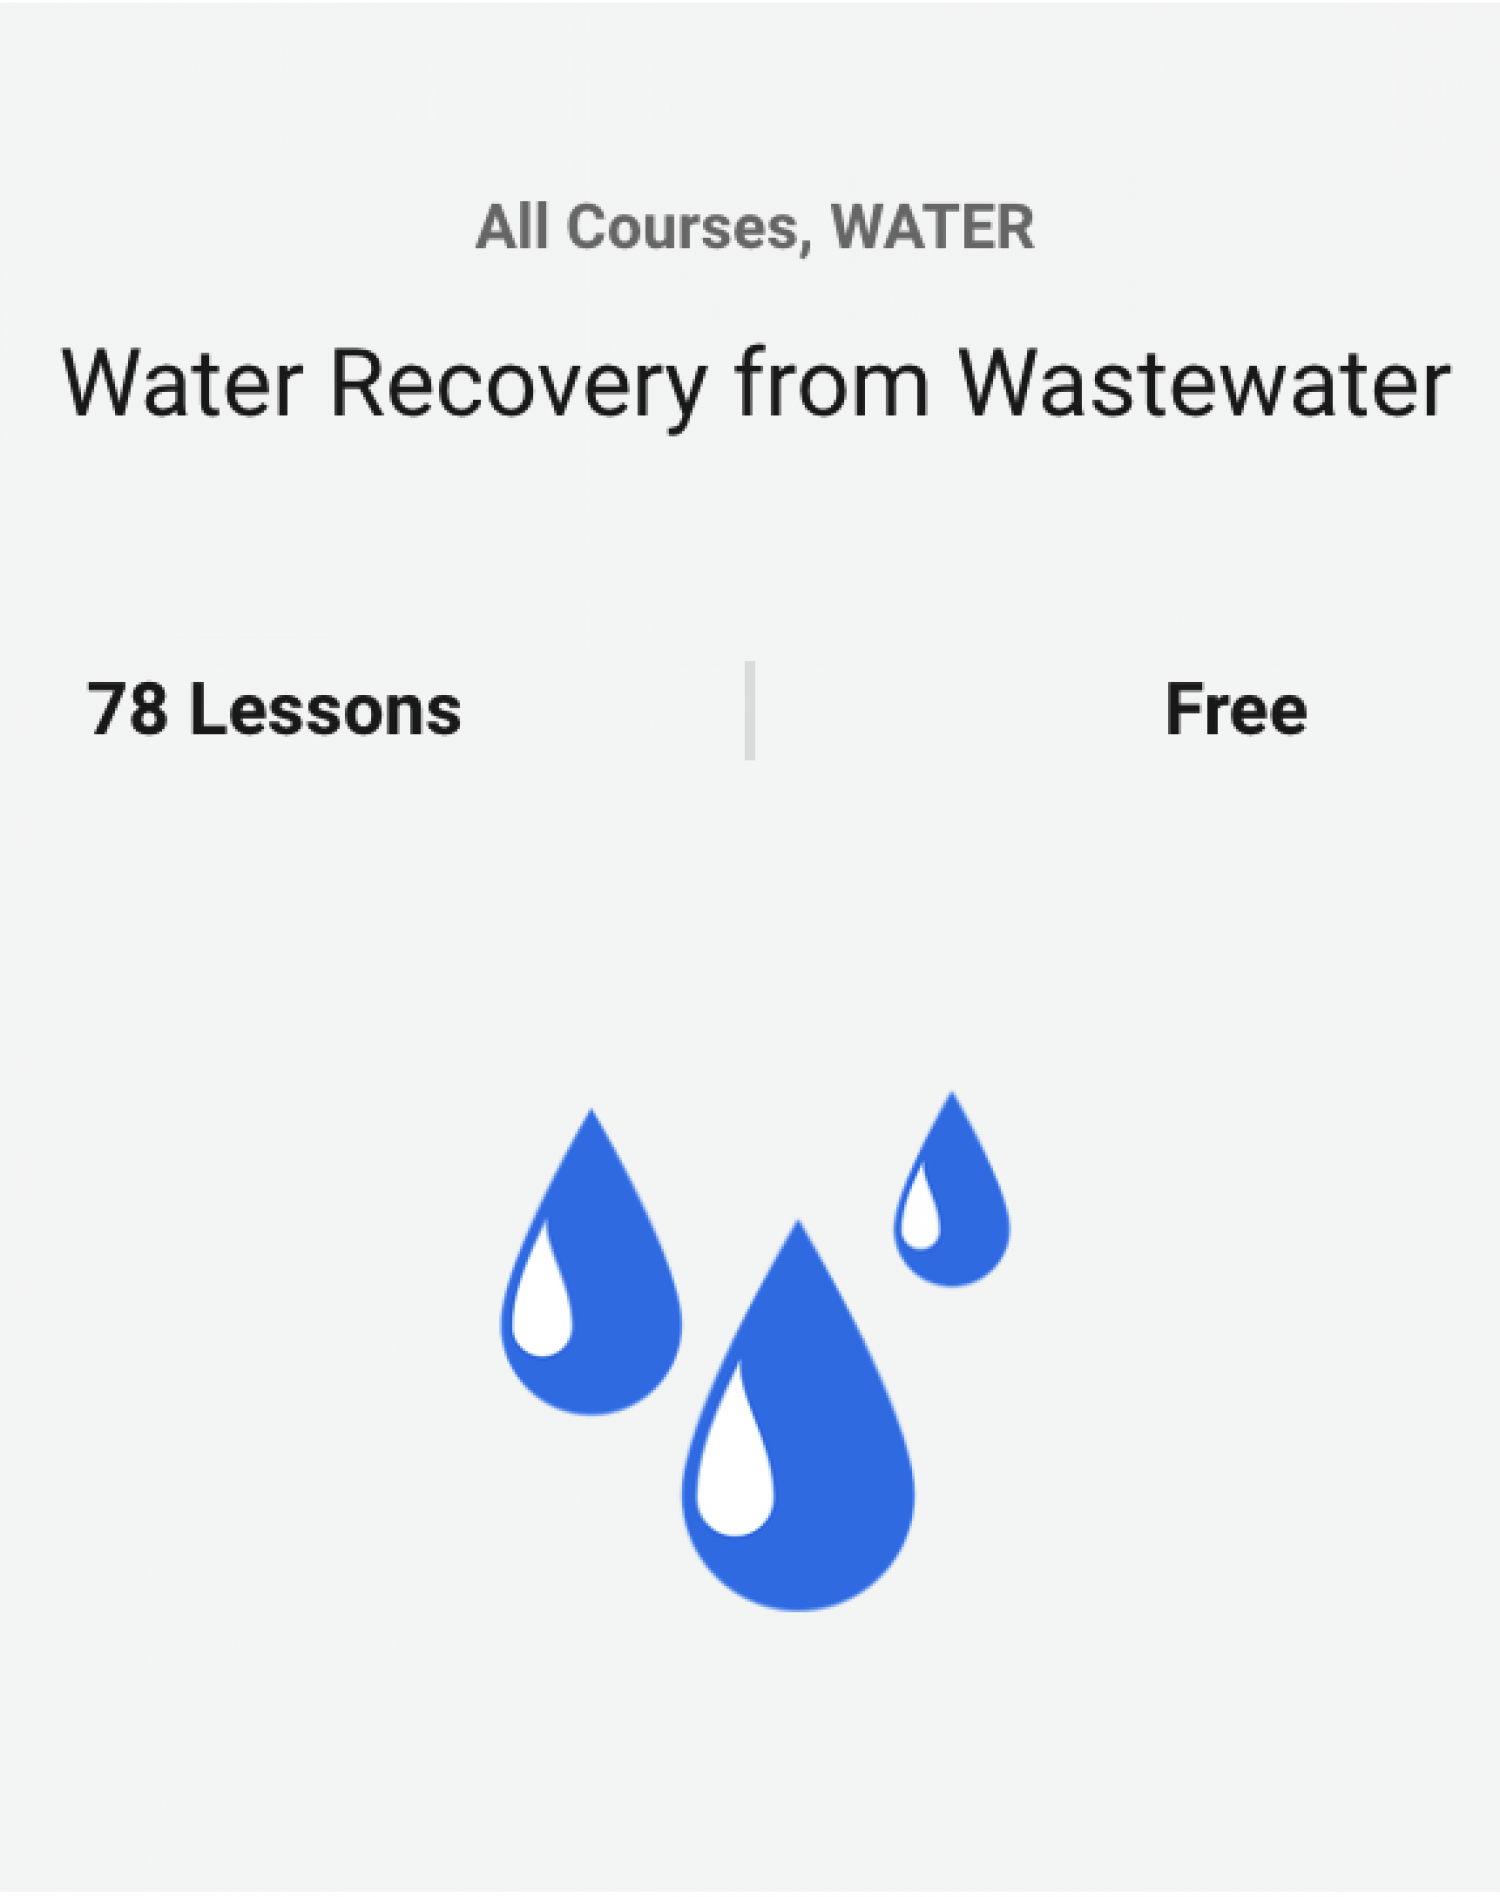 Water Recovery from Wastewater